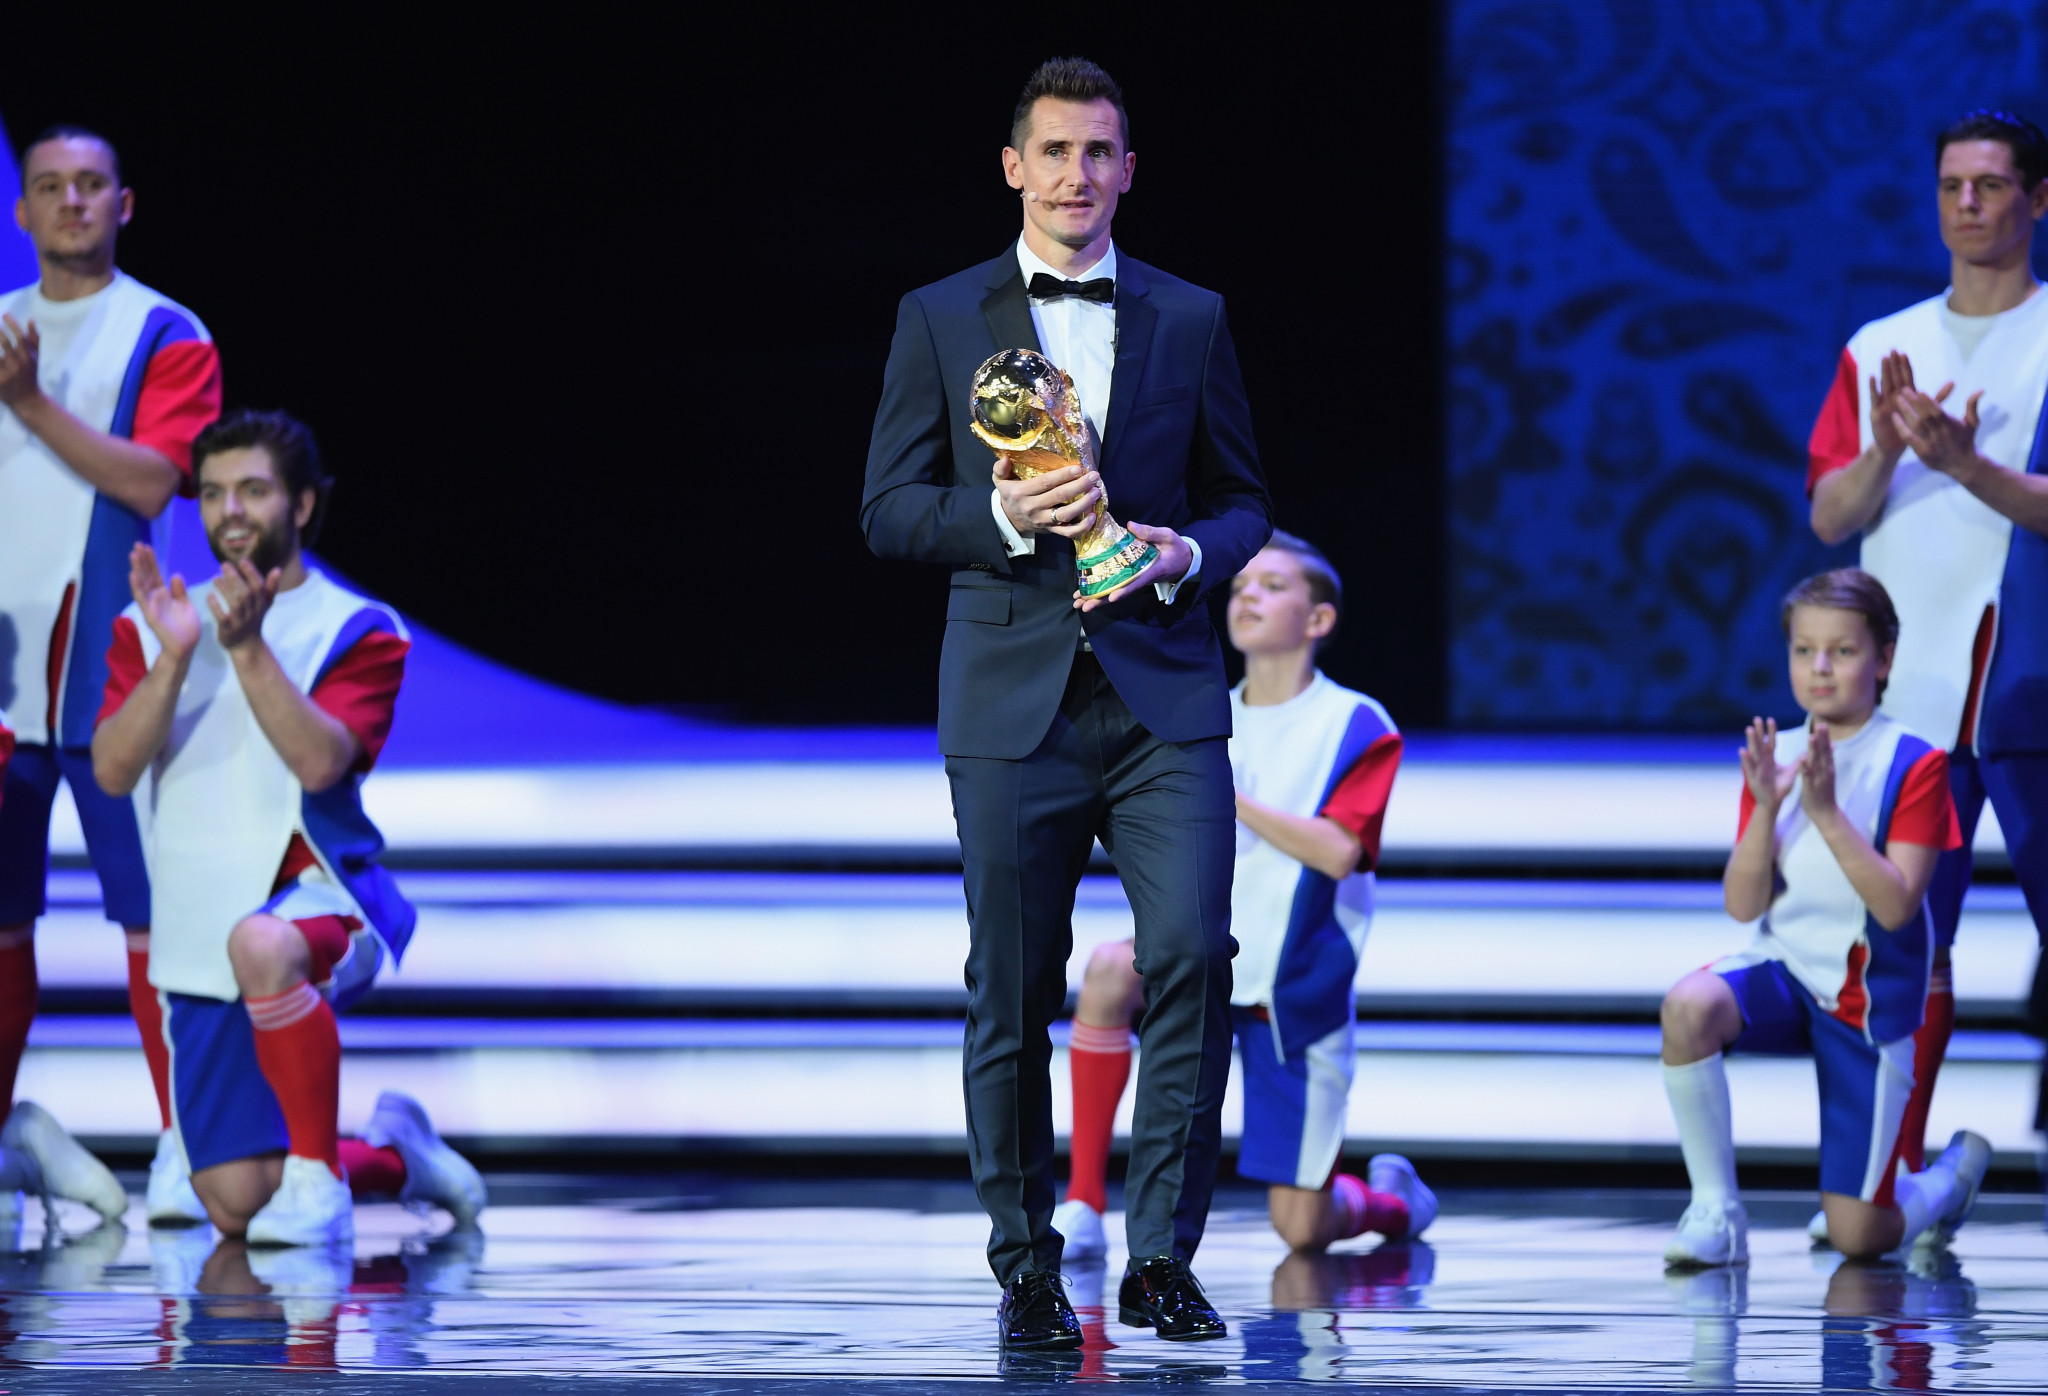 Former Germany striker Miroslav Klose carried the World Cup trophy onto the stage ©Getty Images